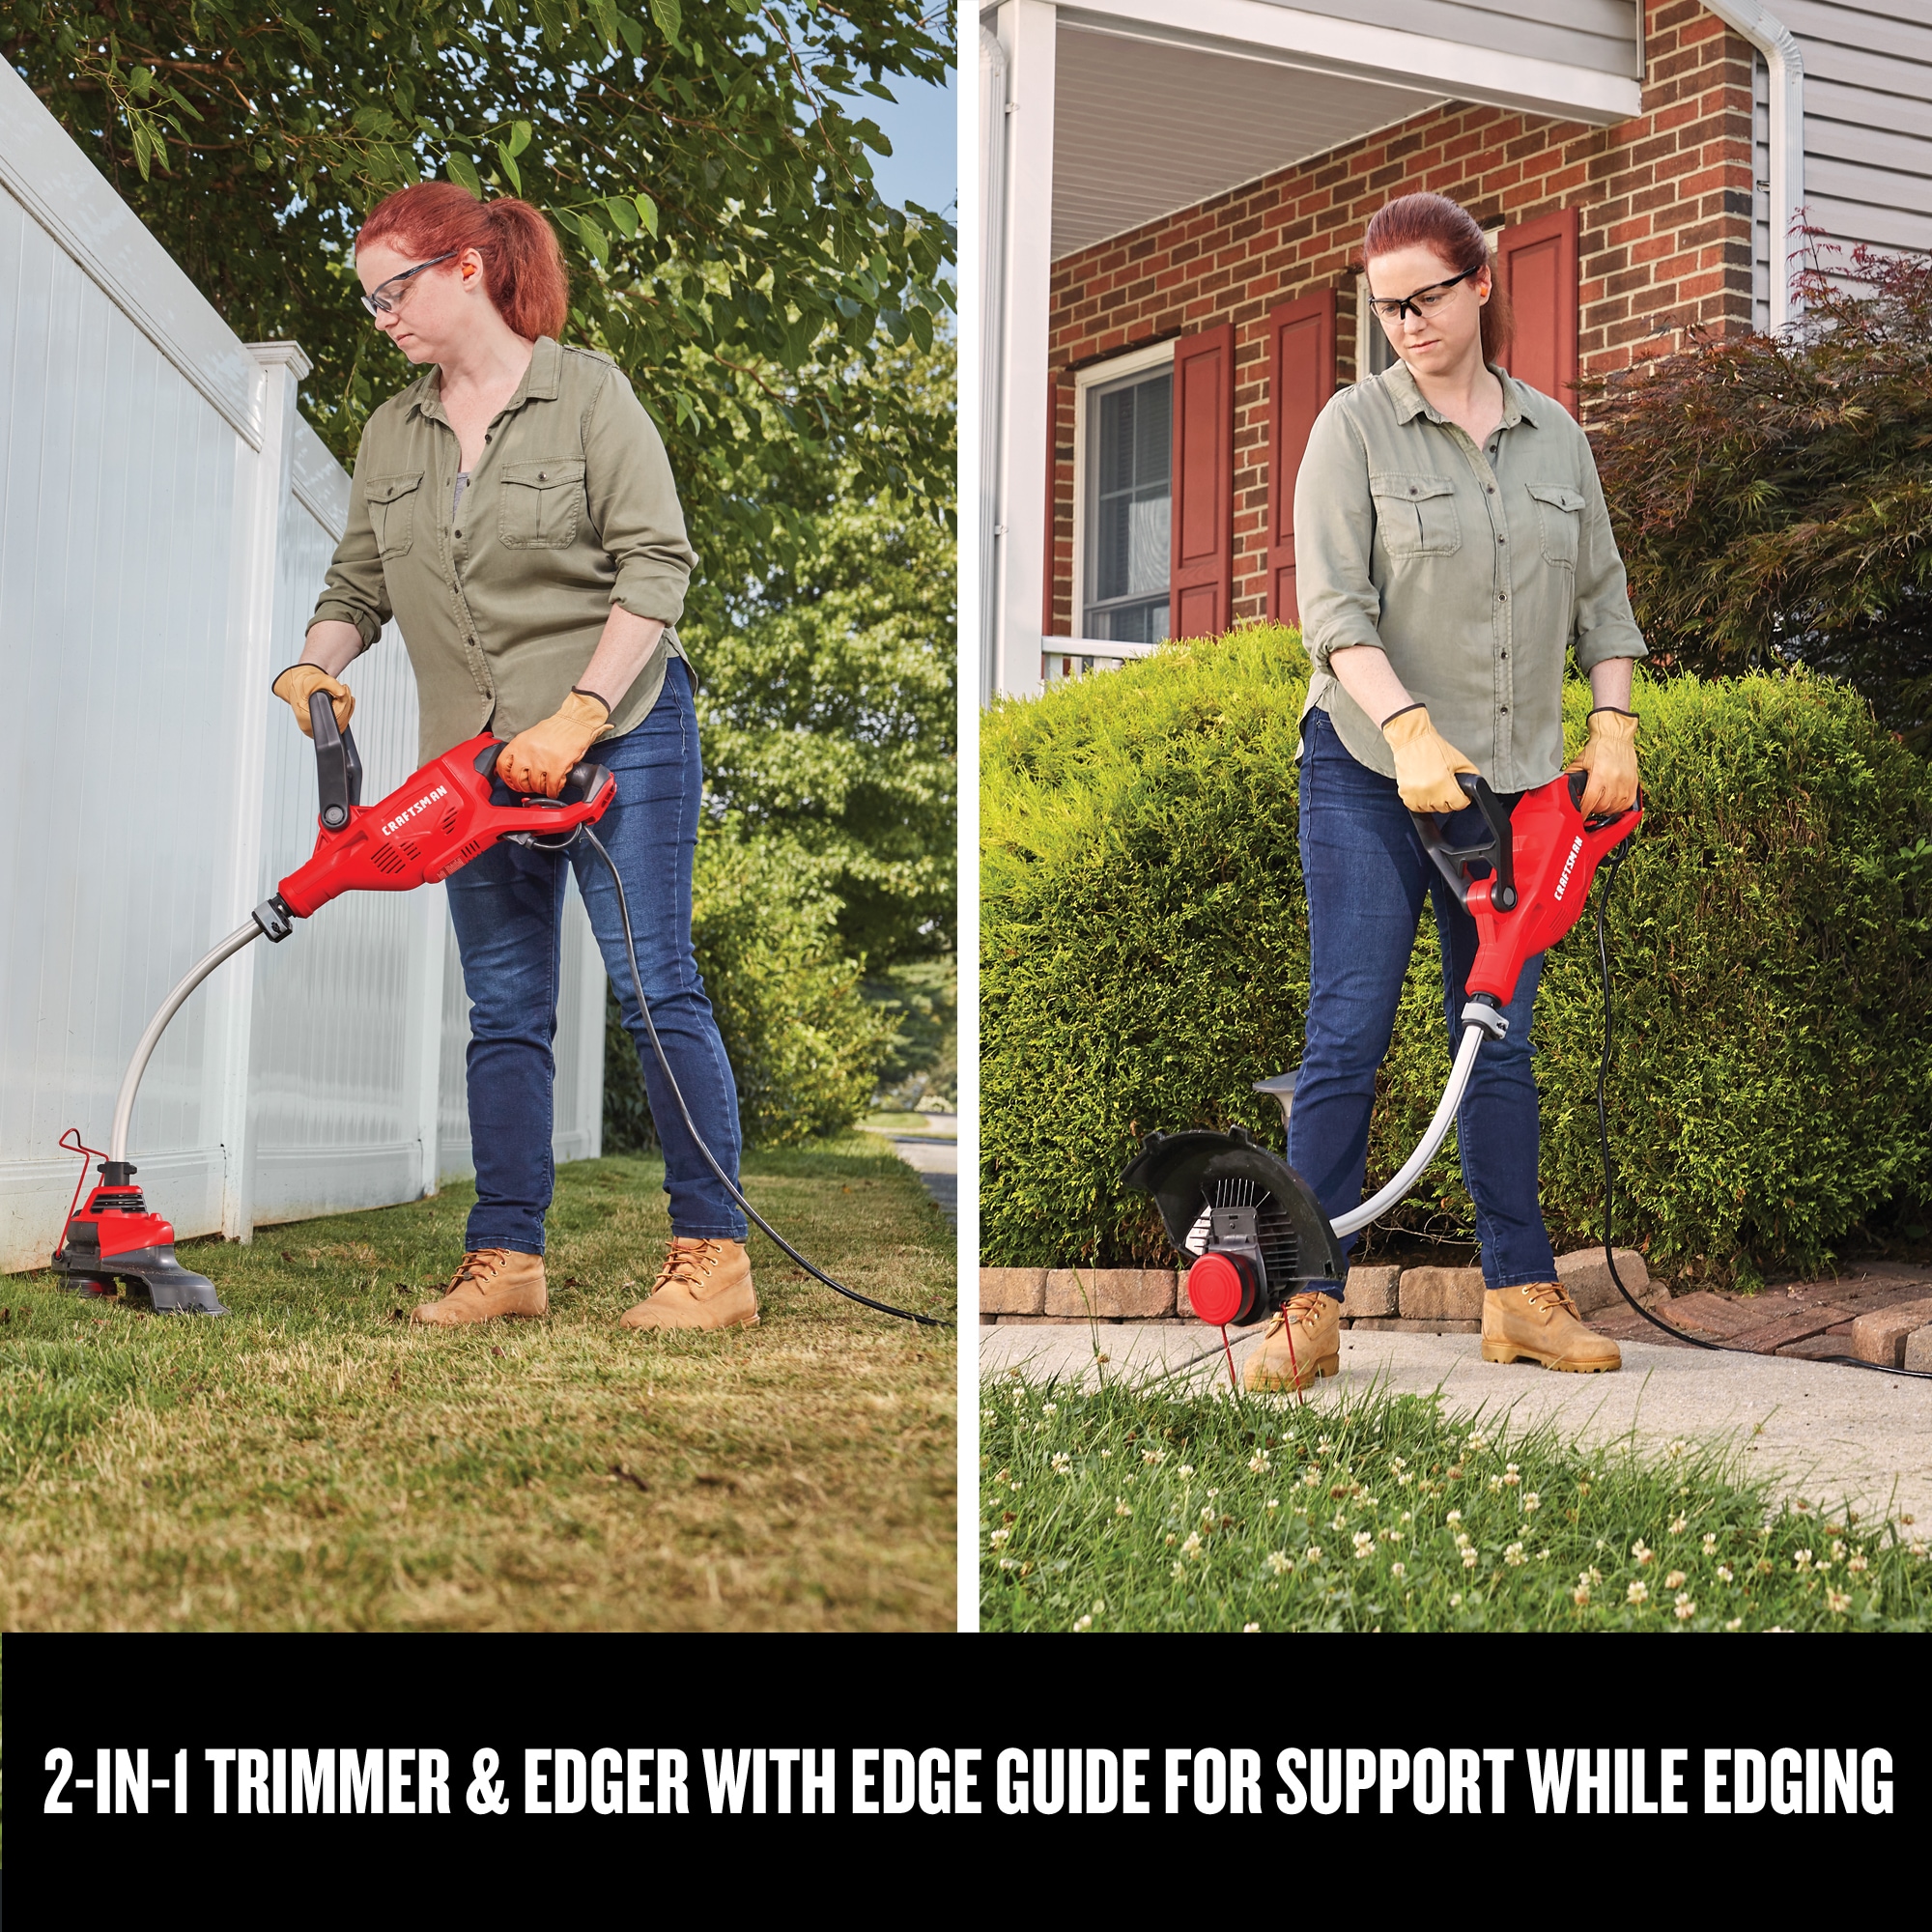 BLACK & DECKER 7.2-Amp Corded Electric String Trimmer and Edger in